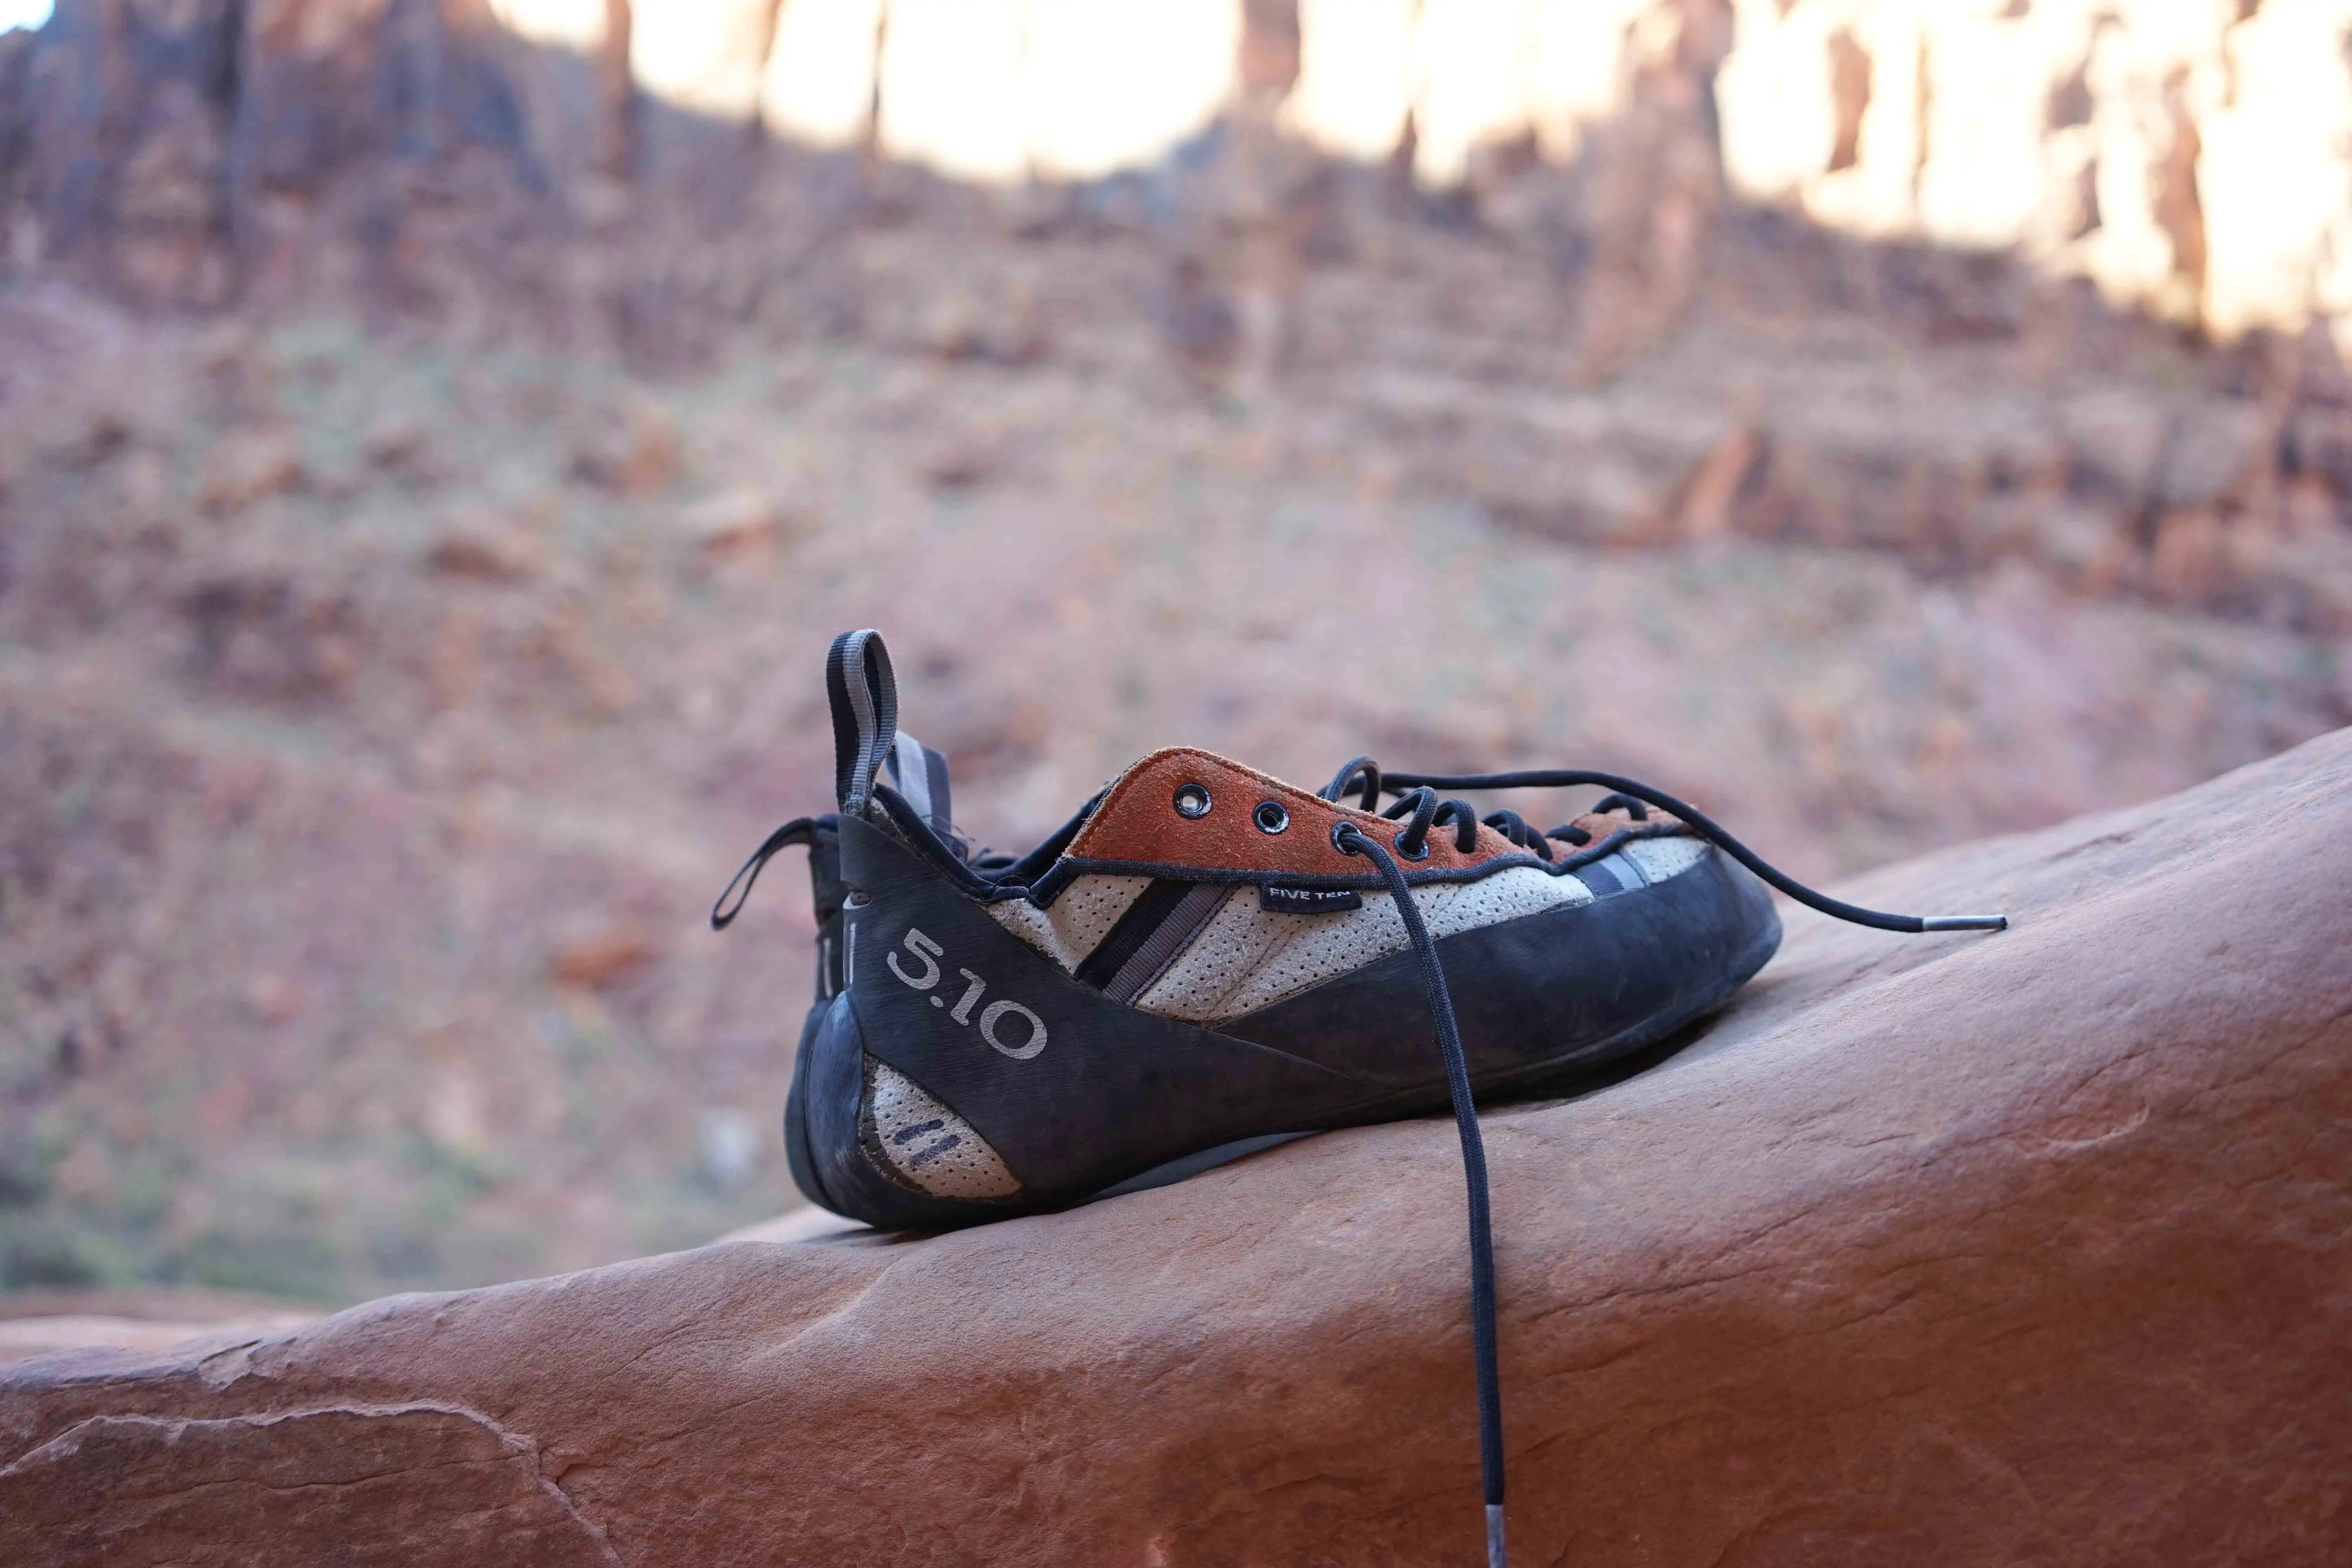 How to Shrink Climbing Shoes - Expert Climbers